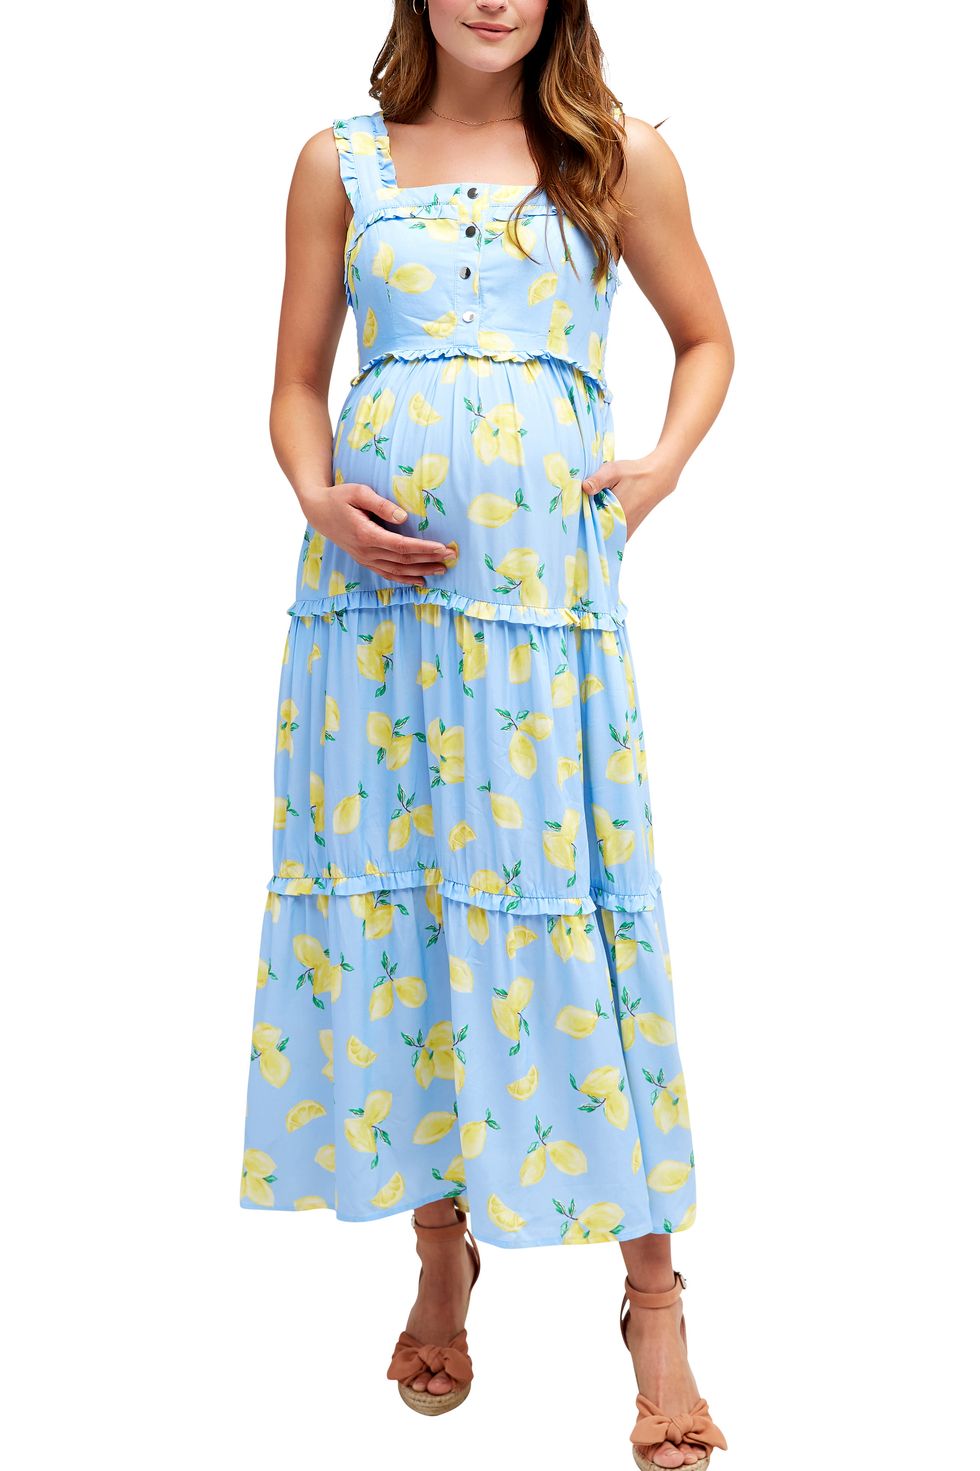 50 Cute Pregnancy Outfits To Try While You Can  Maternity dresses,  Maternity wrap dress, Polka dot maternity dresses